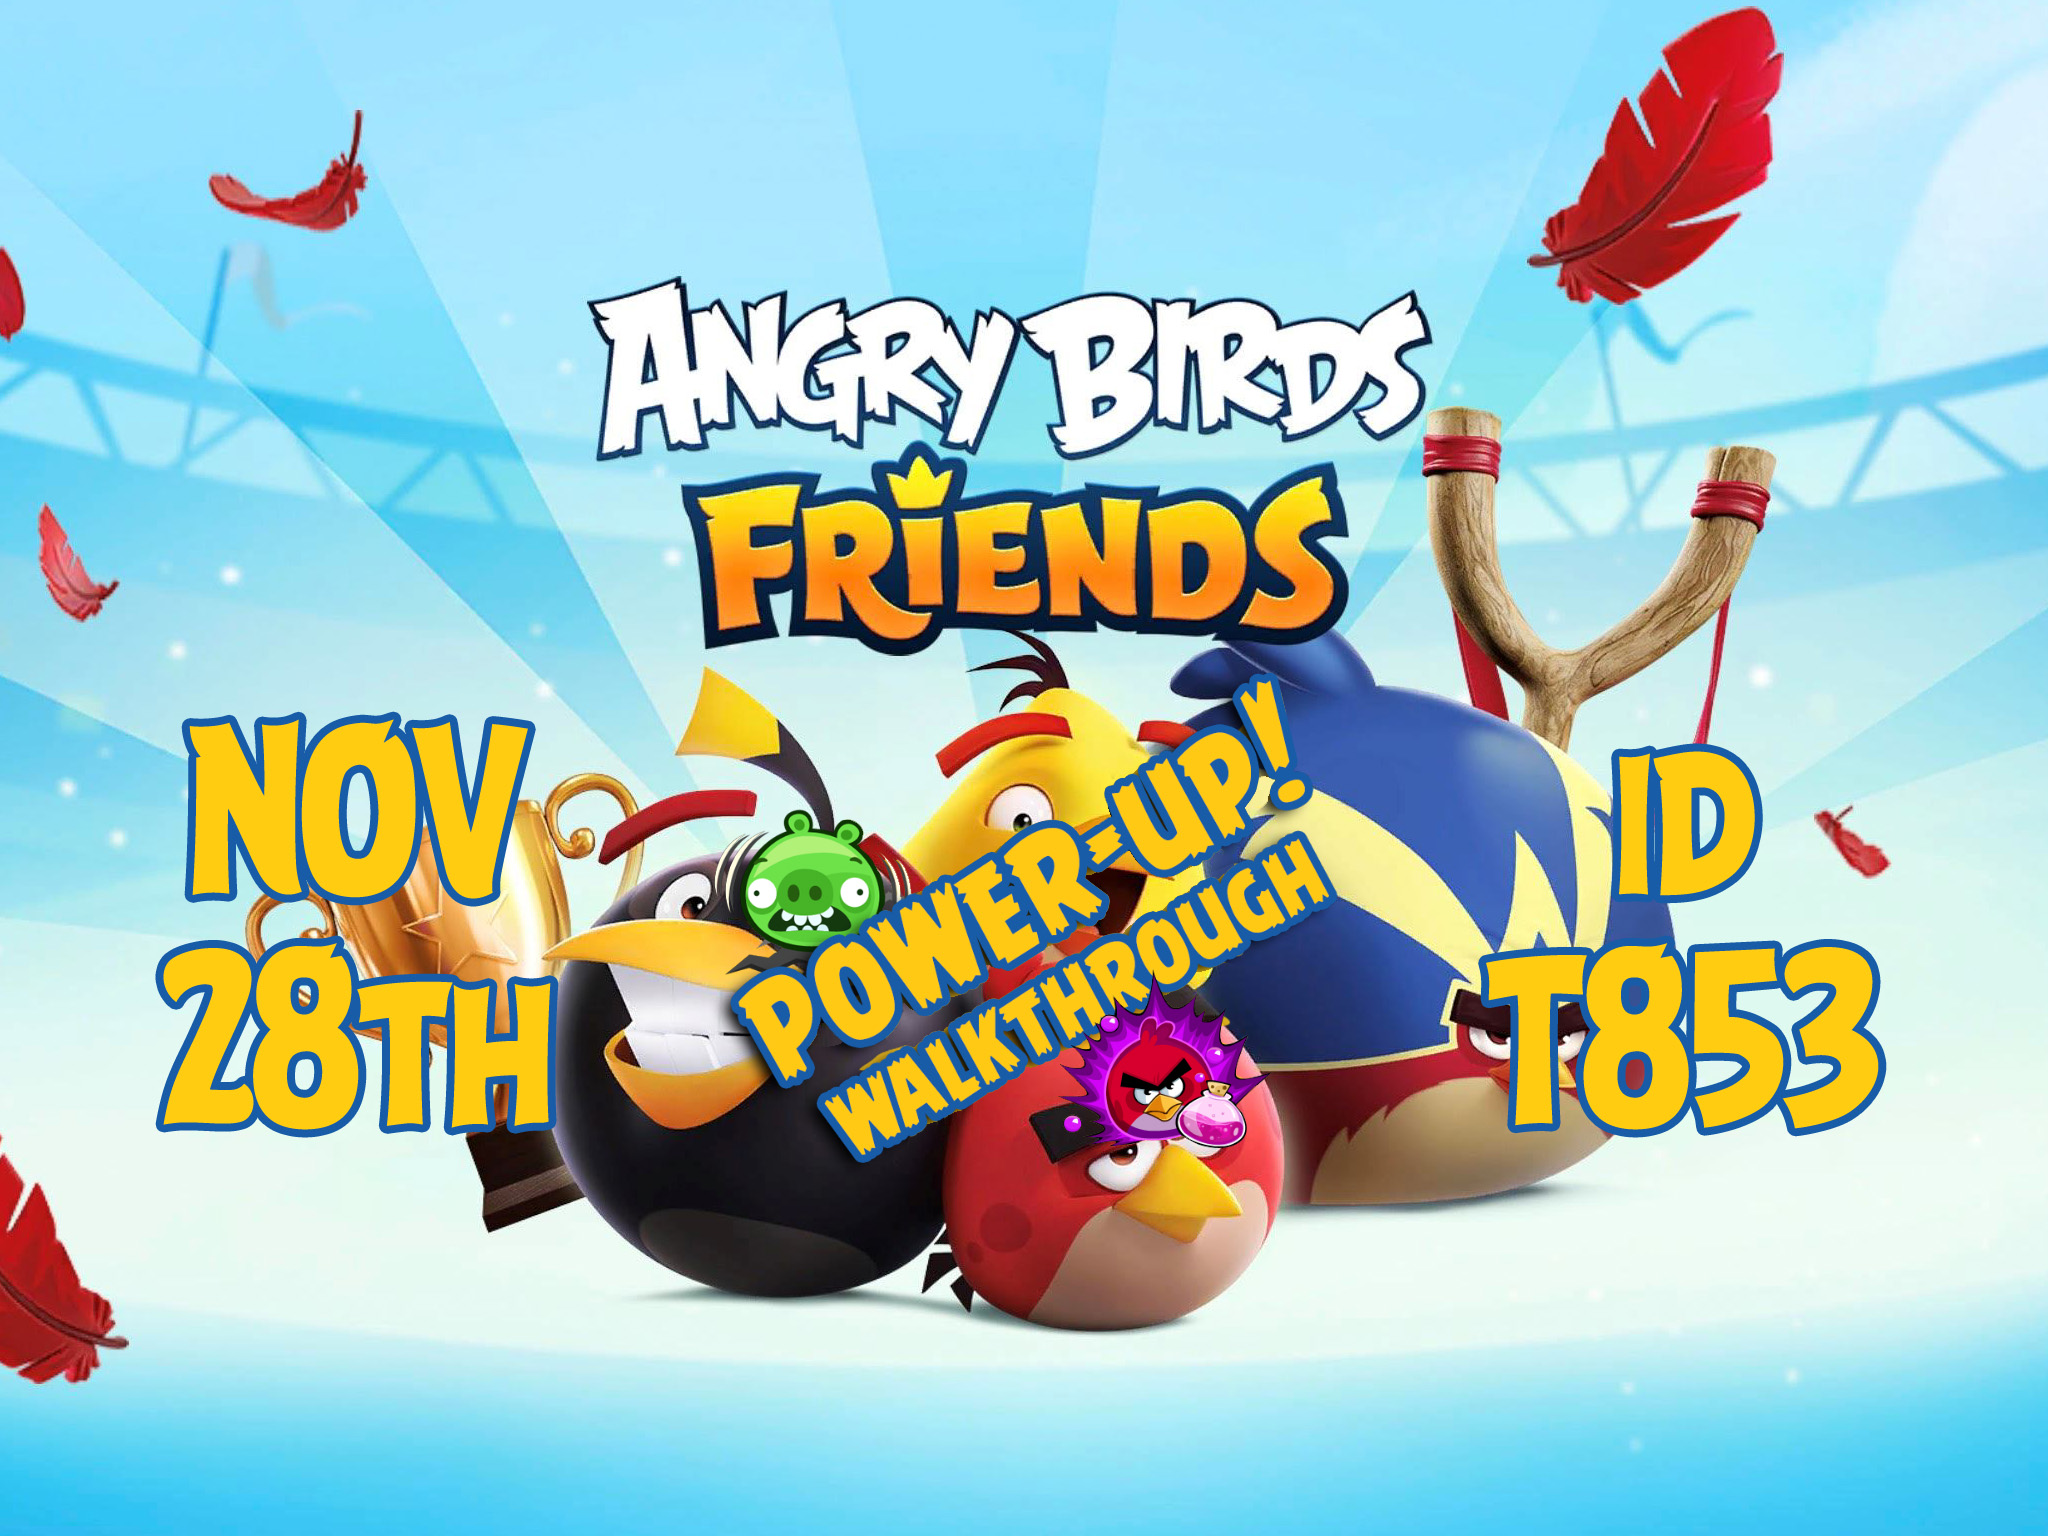 Angry-Birds-Friends-Tournament-T853-Feature-Image-PU